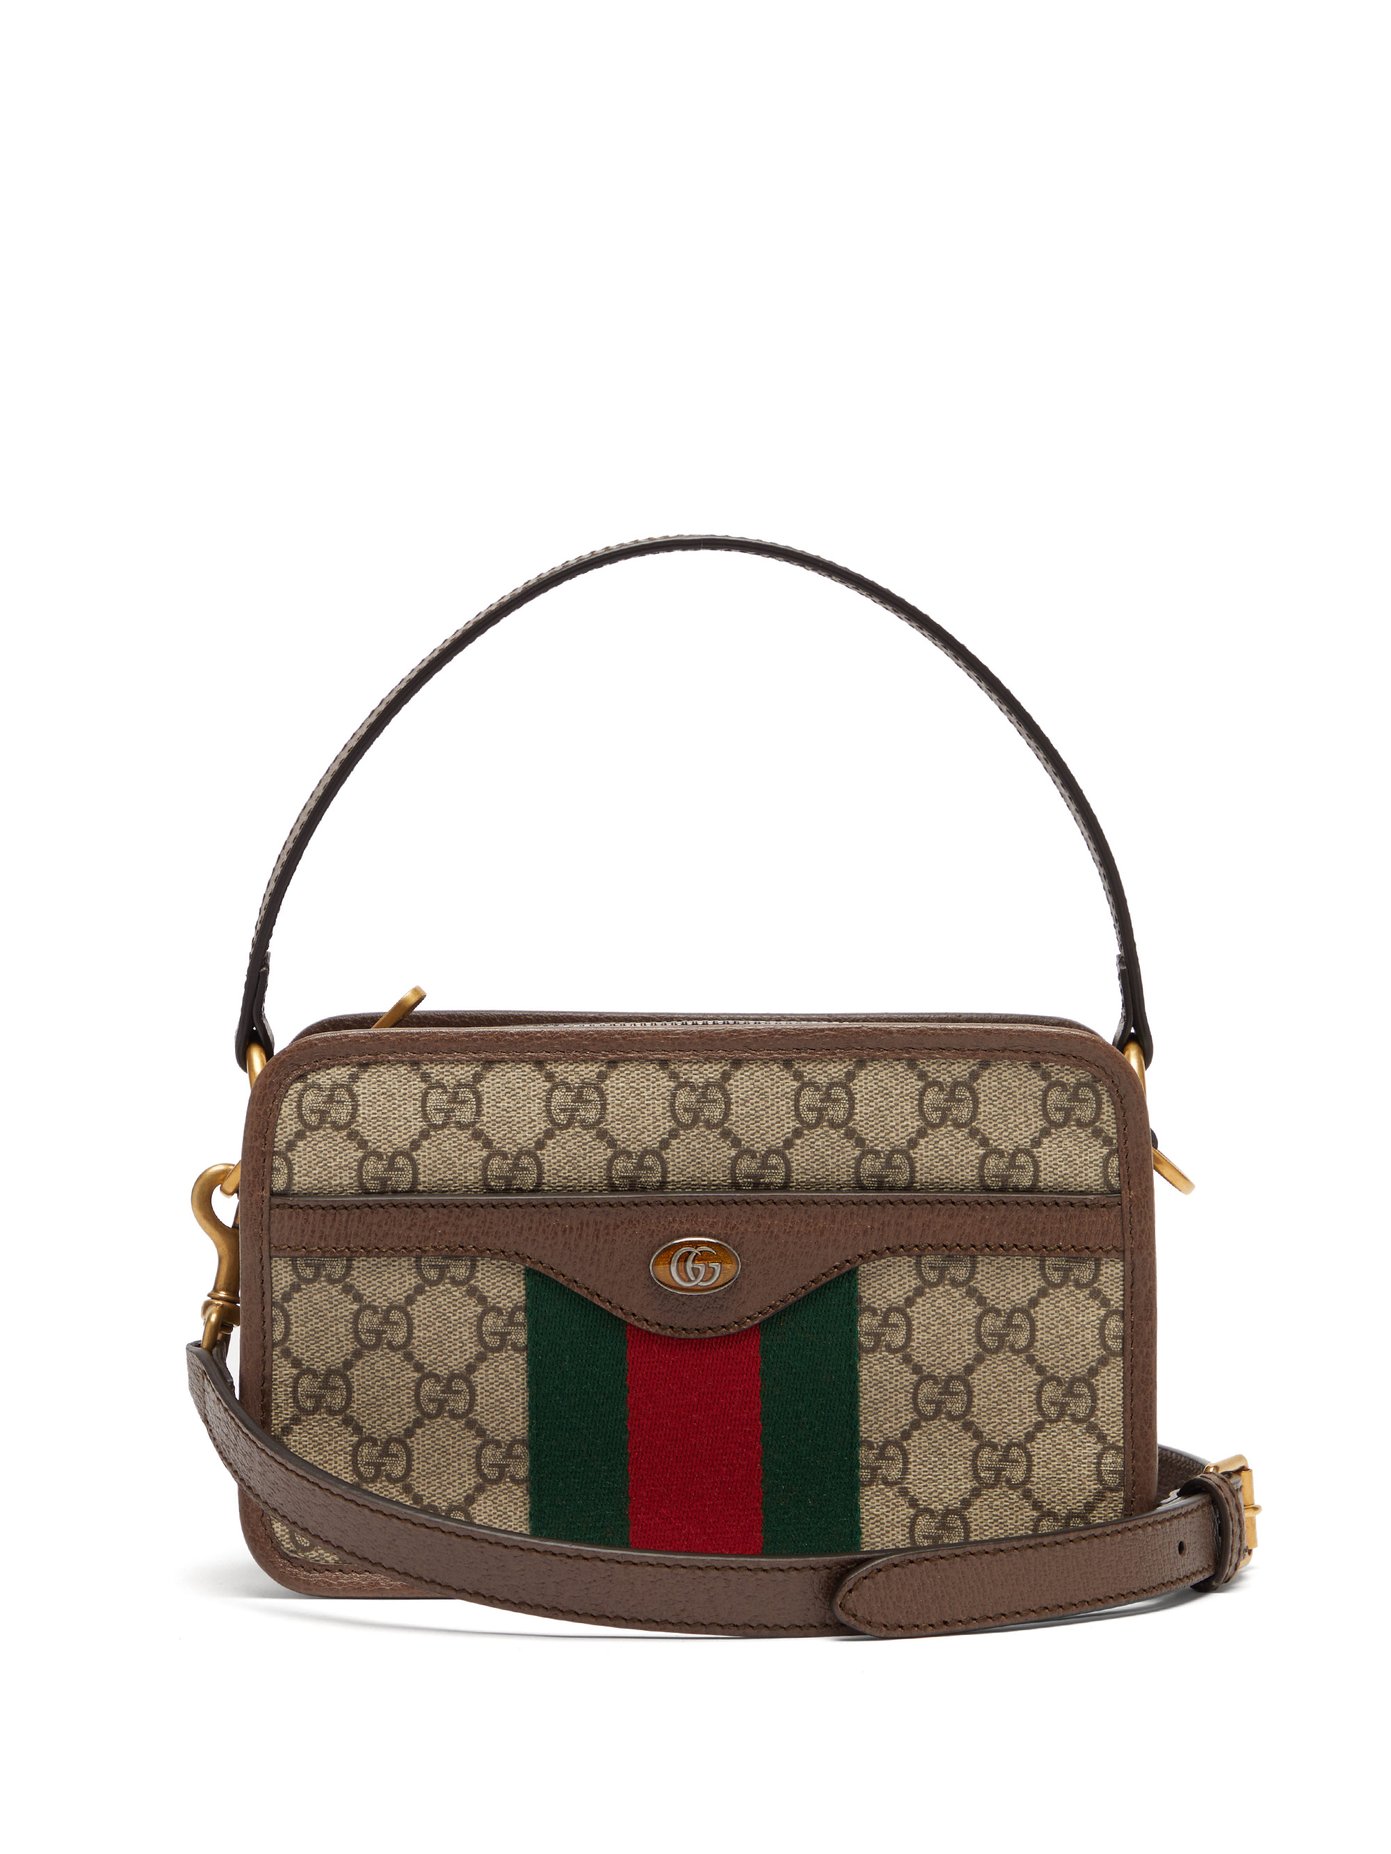 gucci ophidia uk